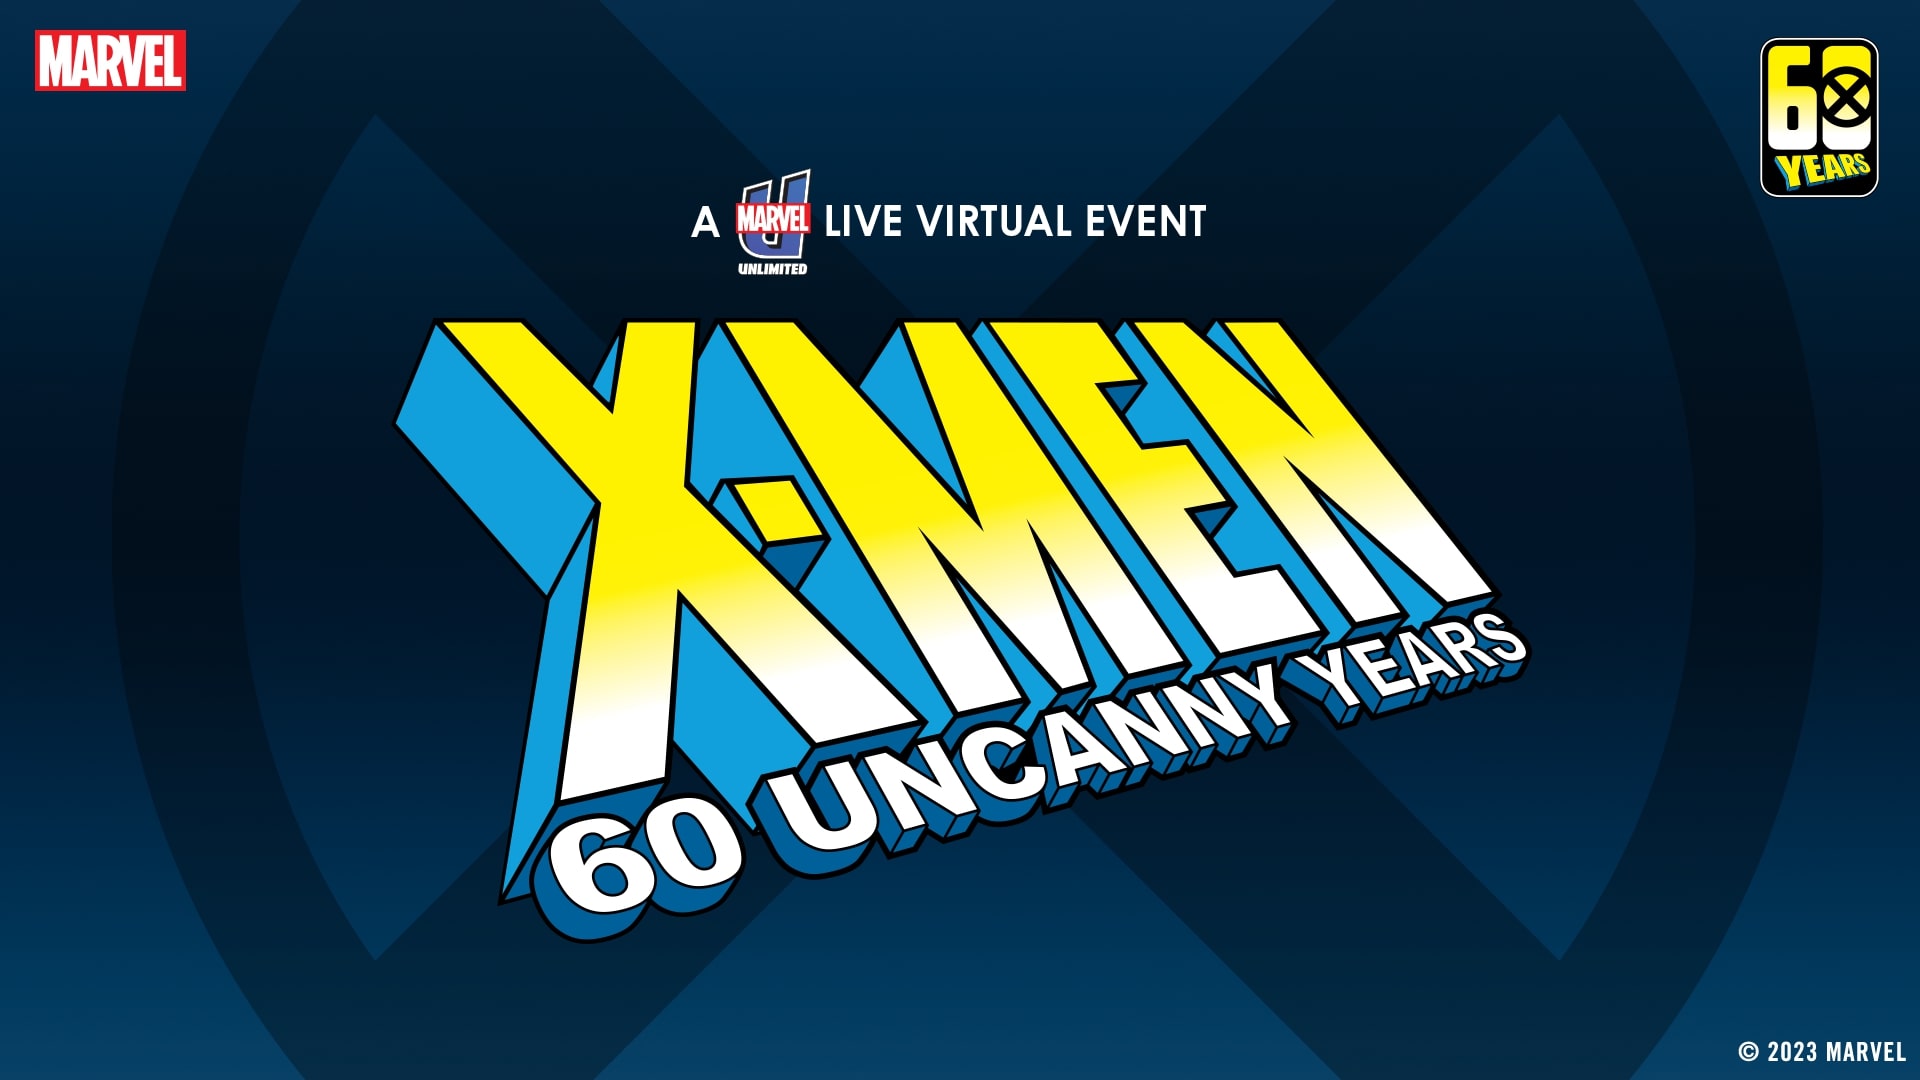 X-Men: 60 Uncanny Years live virtual event coming March 16th